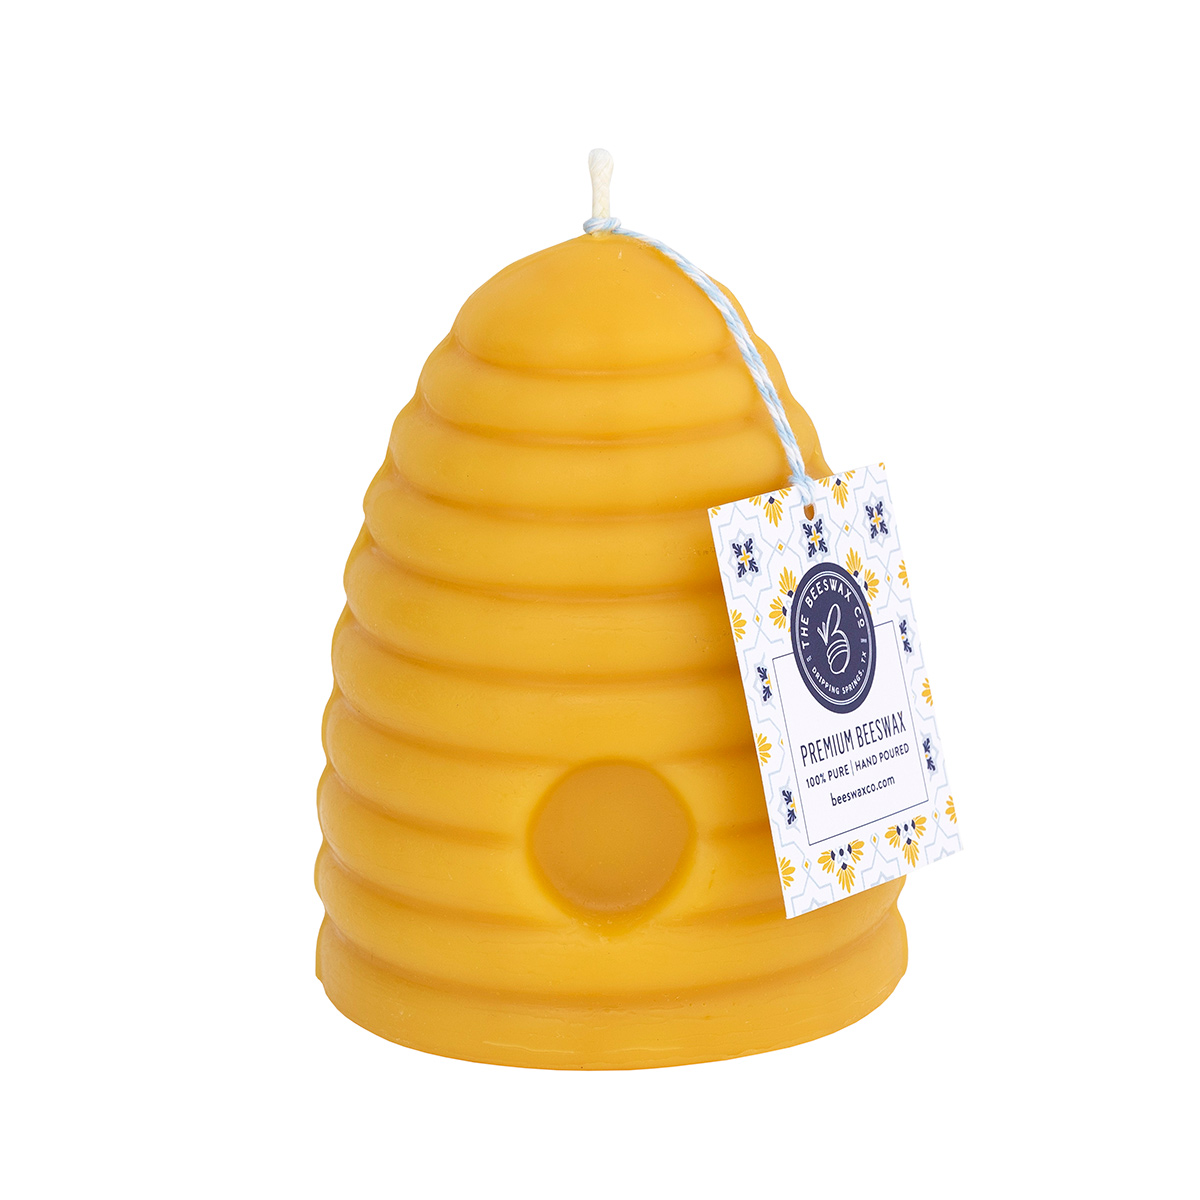 Honey Scented Beeswax Candle - Scents from the Hive collection